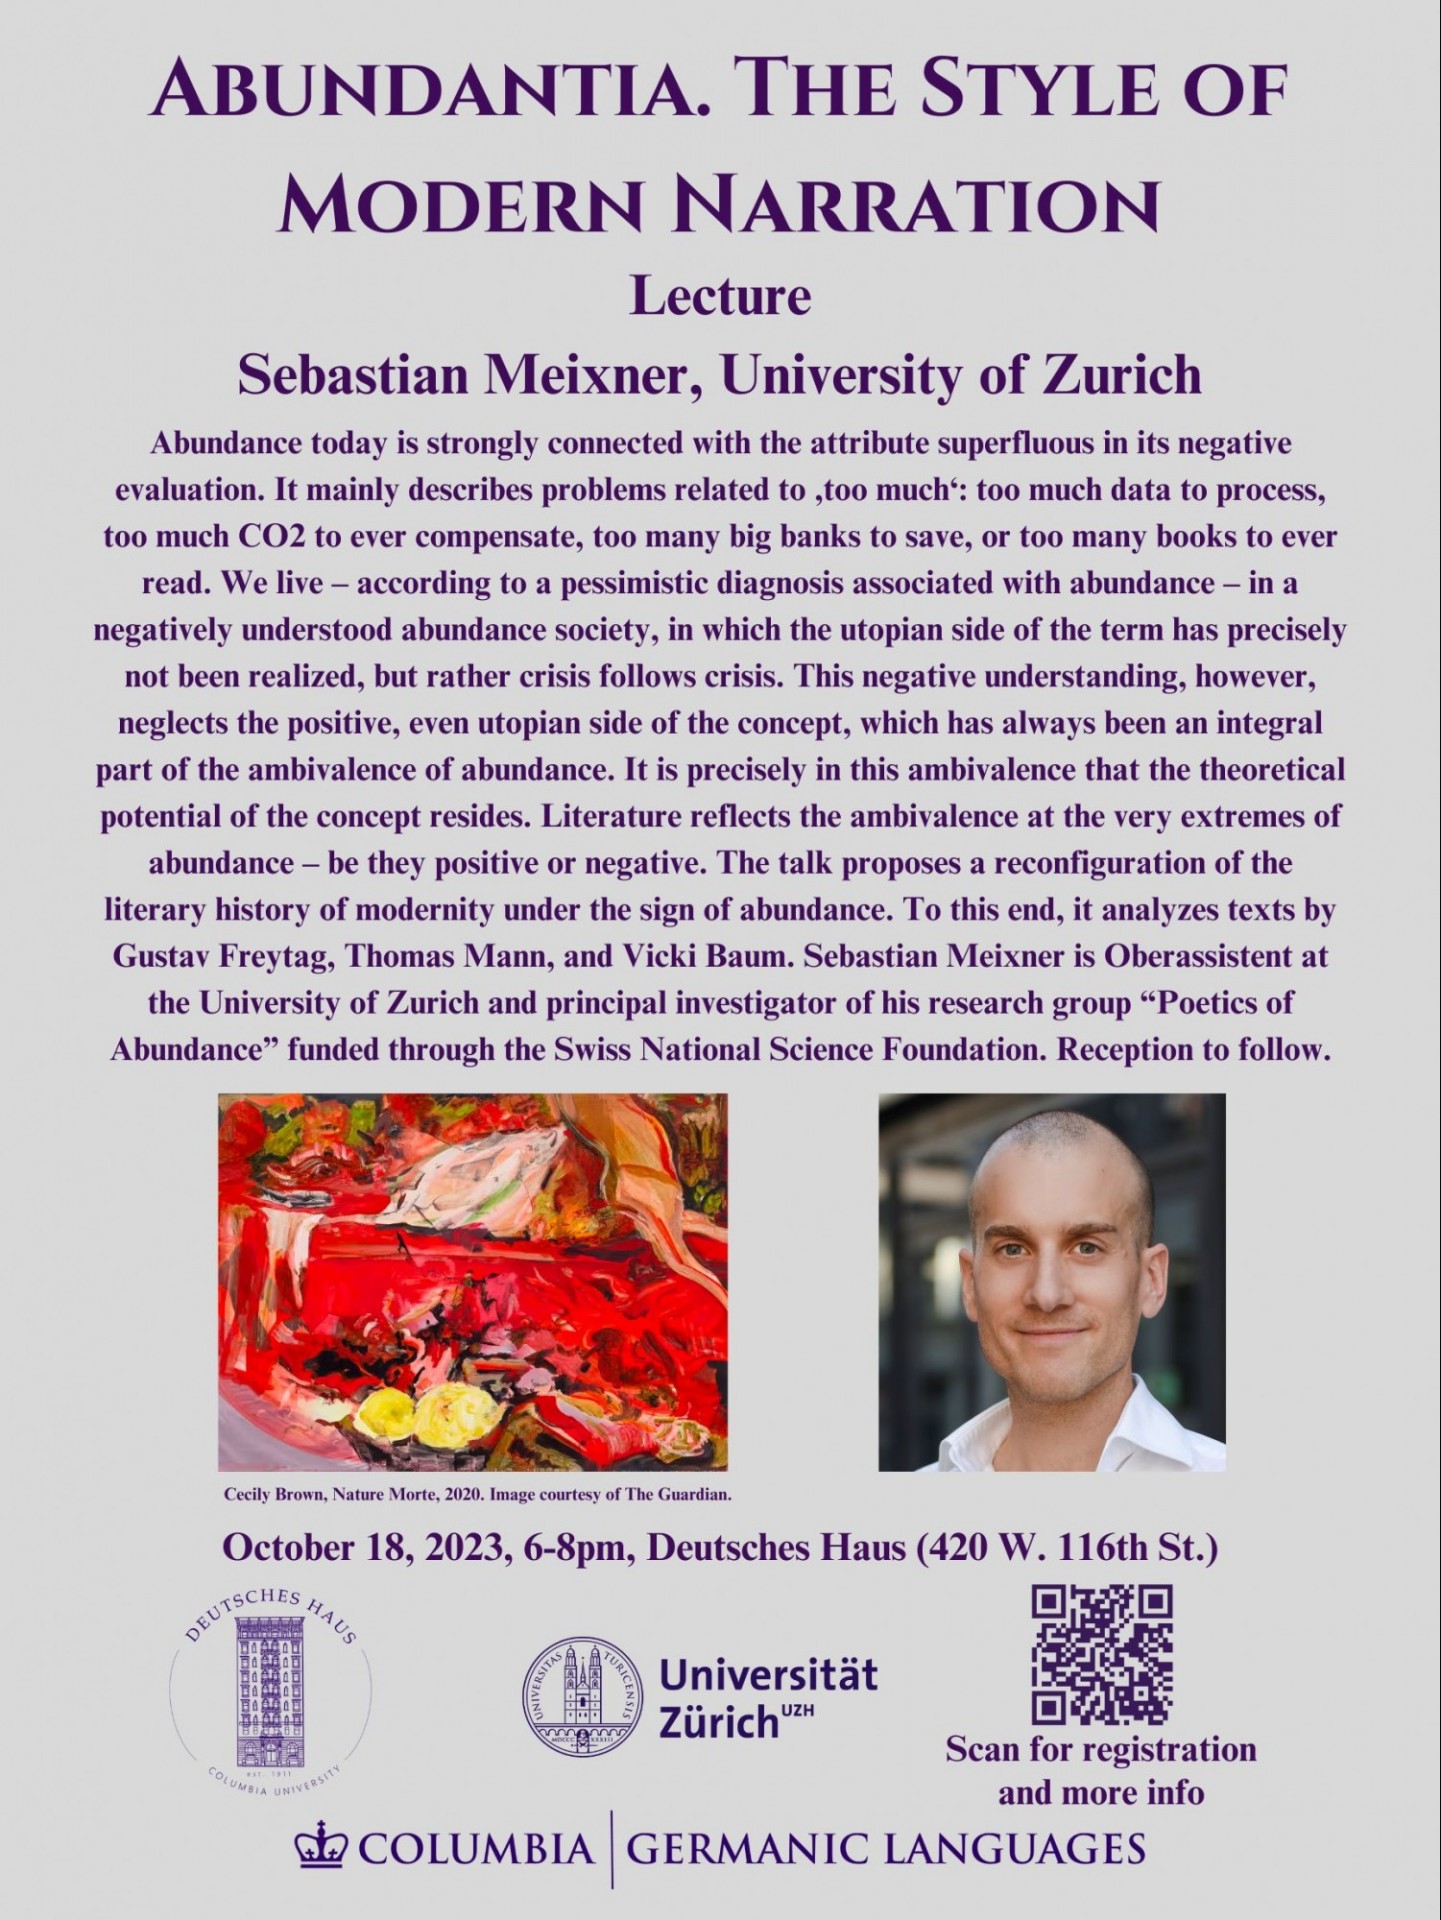 Flyer for the event with Sebastian Meixner on October 18